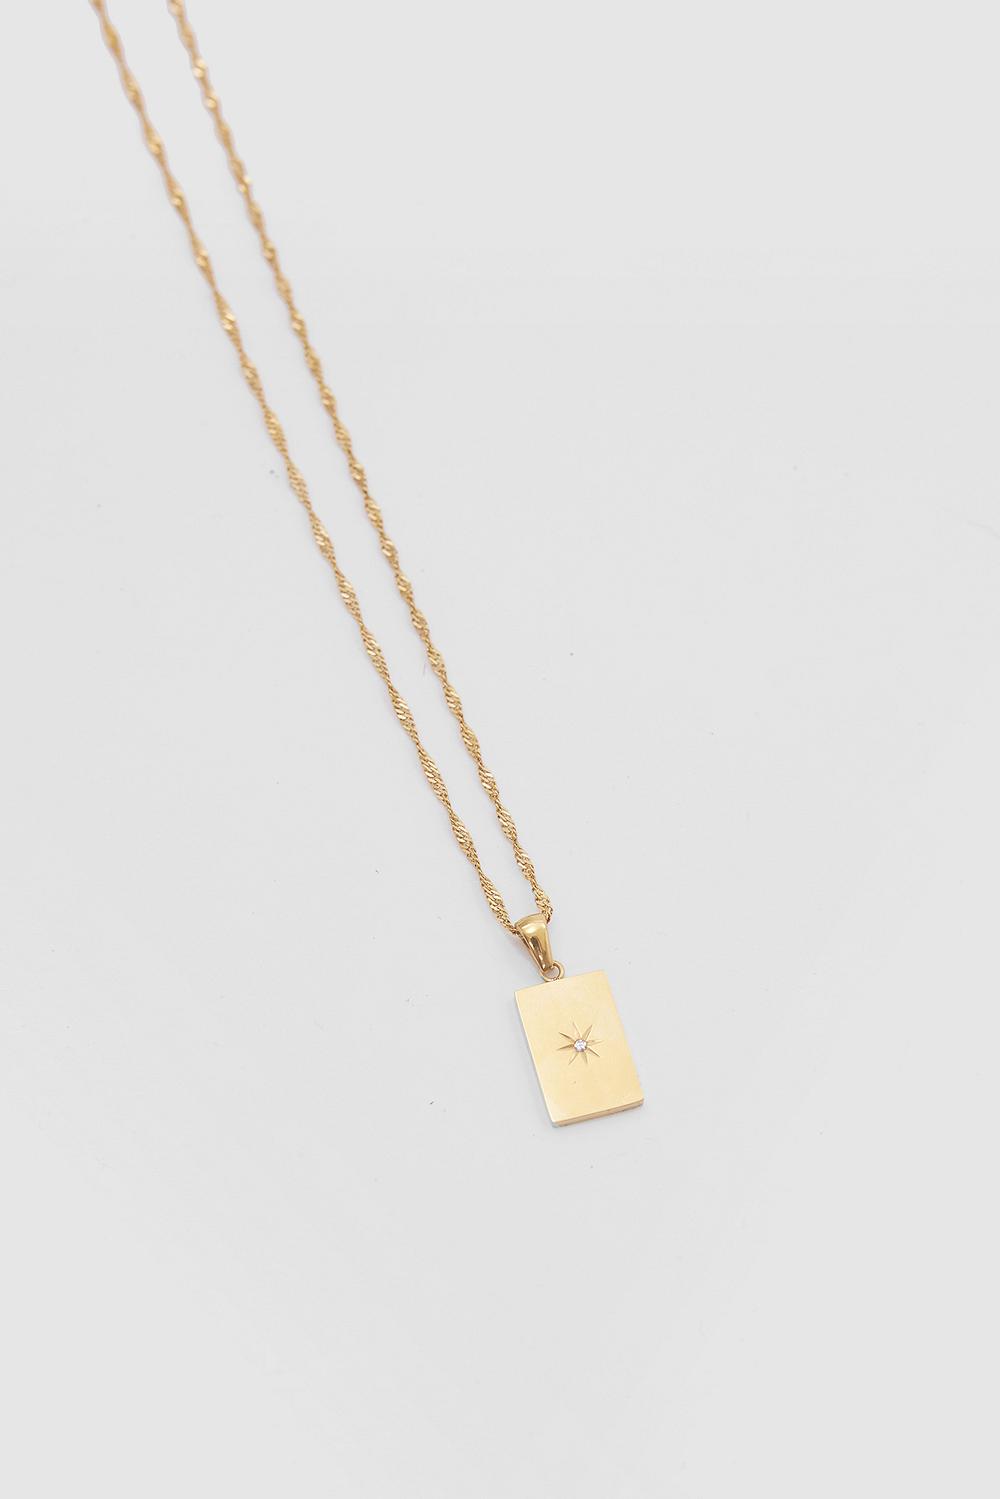 Gold necklace with square pendant